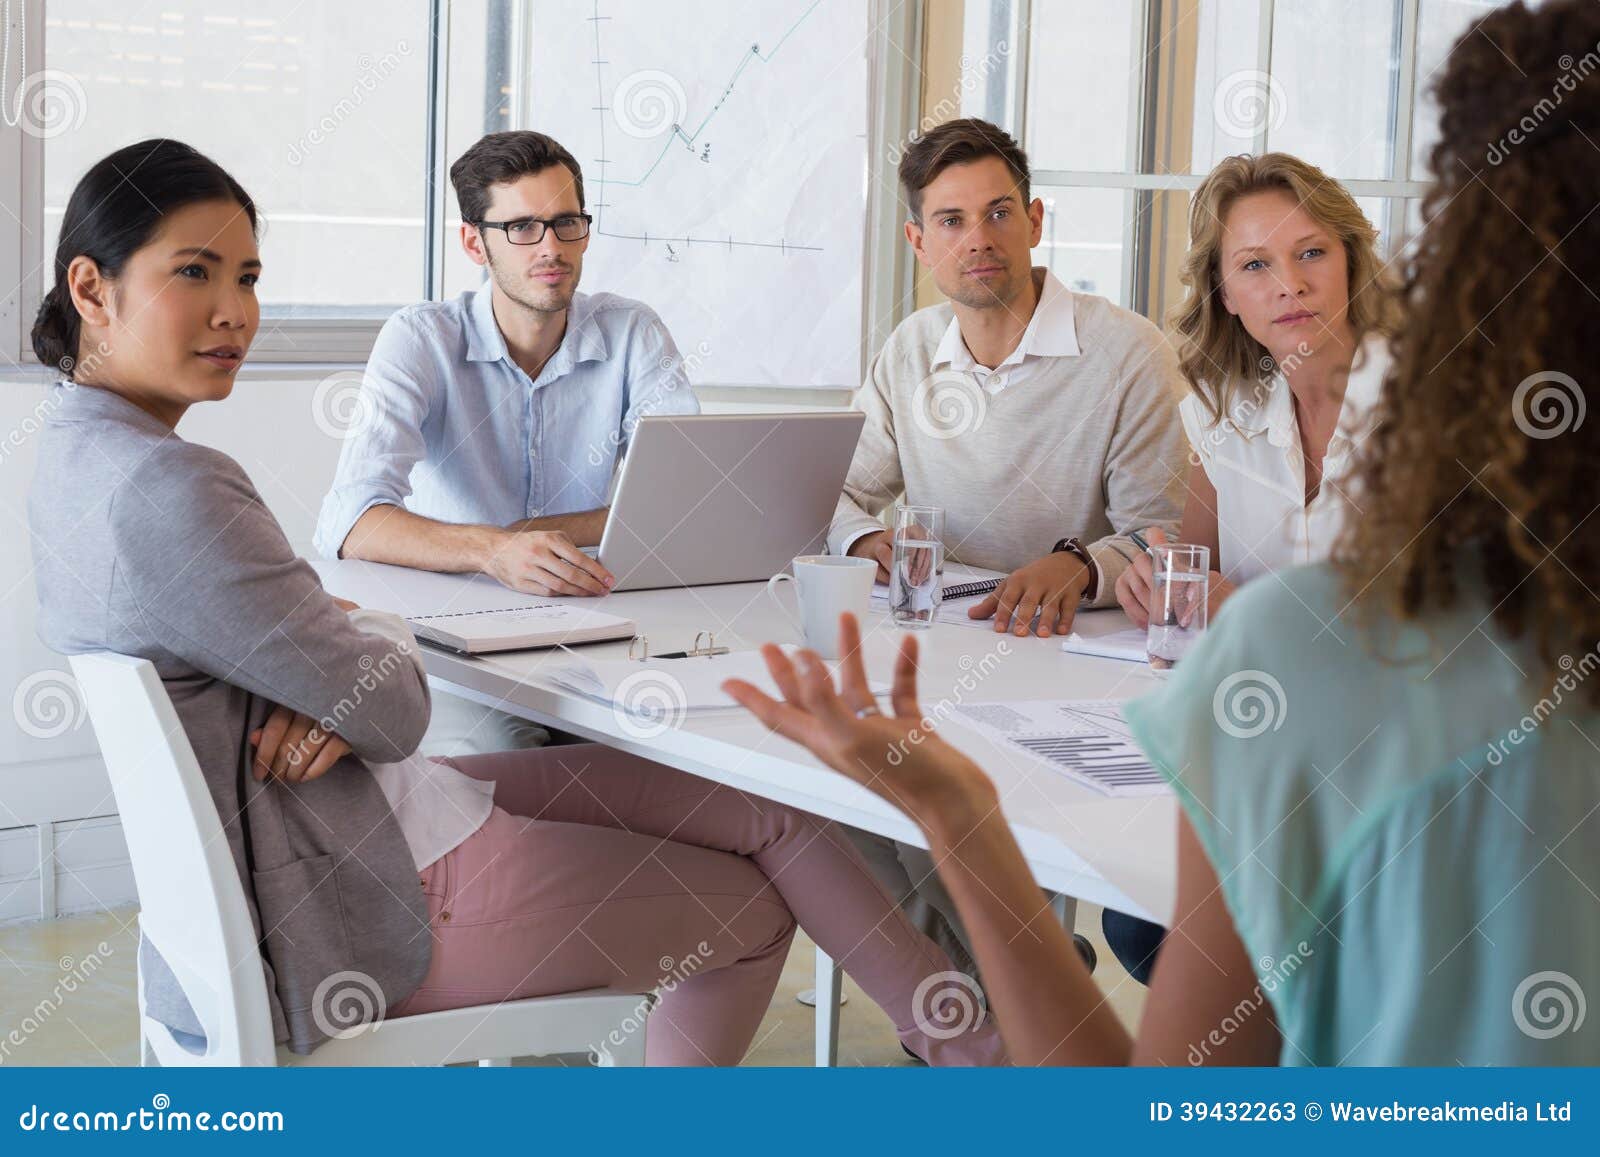 casual business team having a meeting